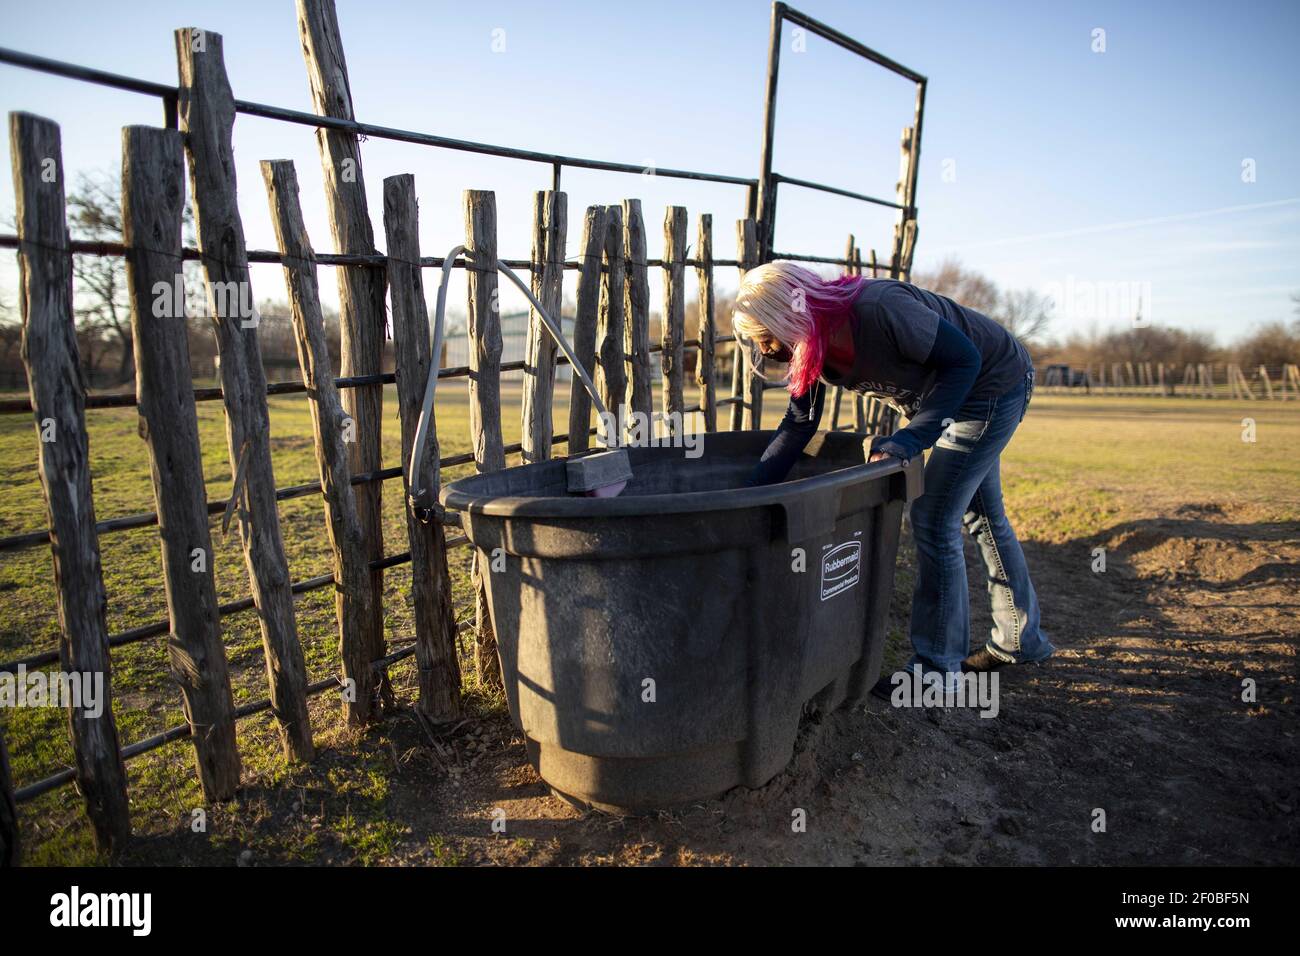 Weatherford, Texas, USA. 6th Mar, 2021. A 100-gallon barrel of water is placed in the middle of a horse corral for the four horses to drink. The barrel has an auto water foist to refill the water when it is emptied. Horses have to drink up to 2500 gallons a day to prevent illness or death from colic. As the snow has melted in Texas after the random winter storm that left millions without water and power, many Texans are still recovering from the damages. From Weatherford, Texas, Laura shares her experience of what it was like for her and her husband during the storm. Laura is a gr Stock Photo